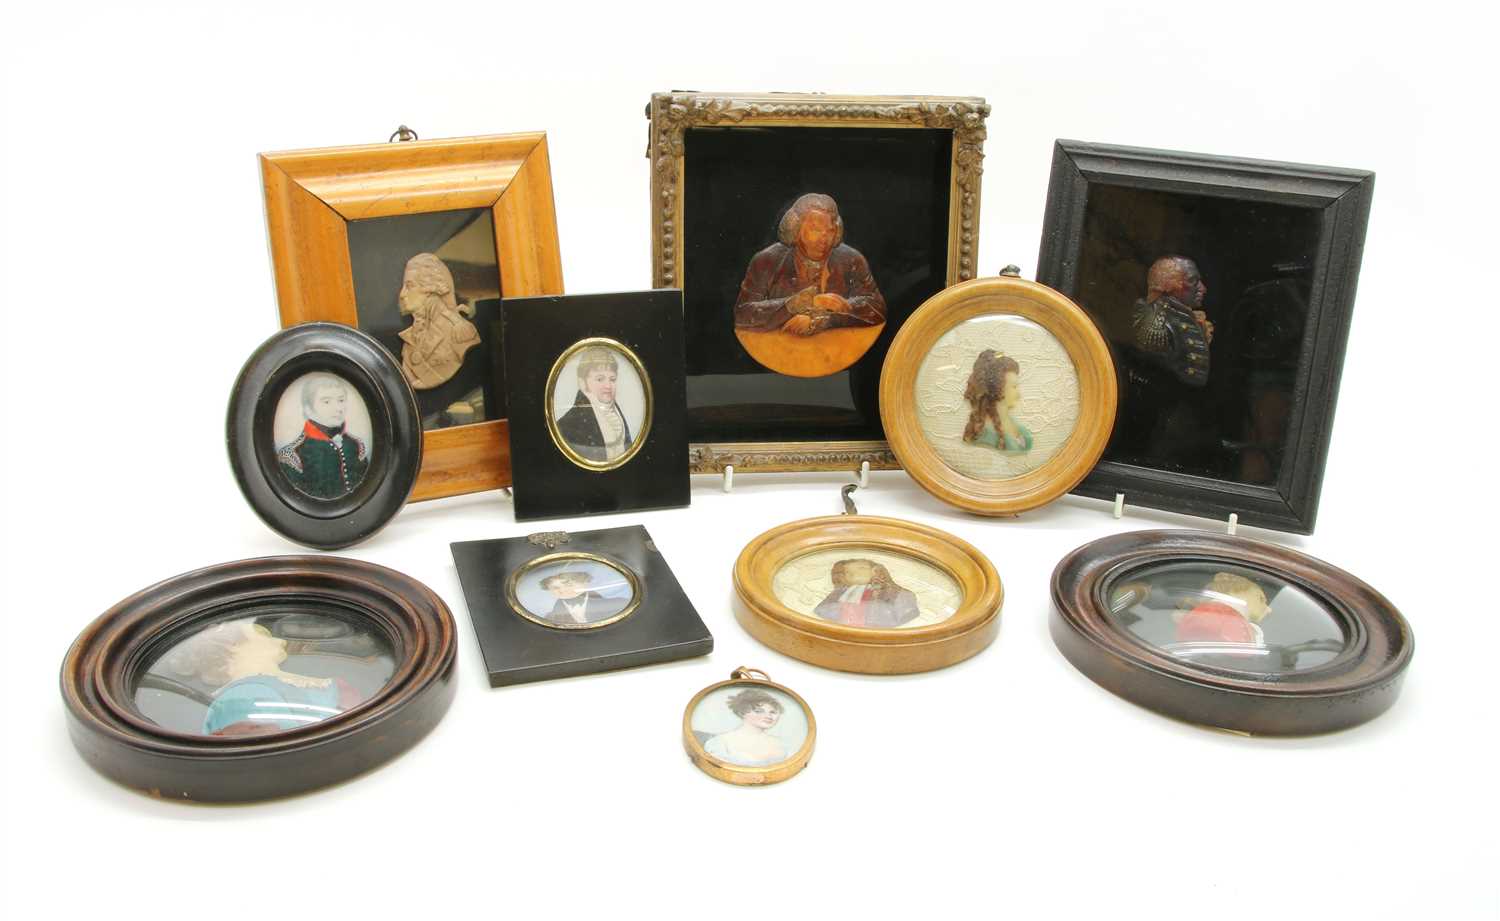 Lot 300 - A collection of wax portrait busts